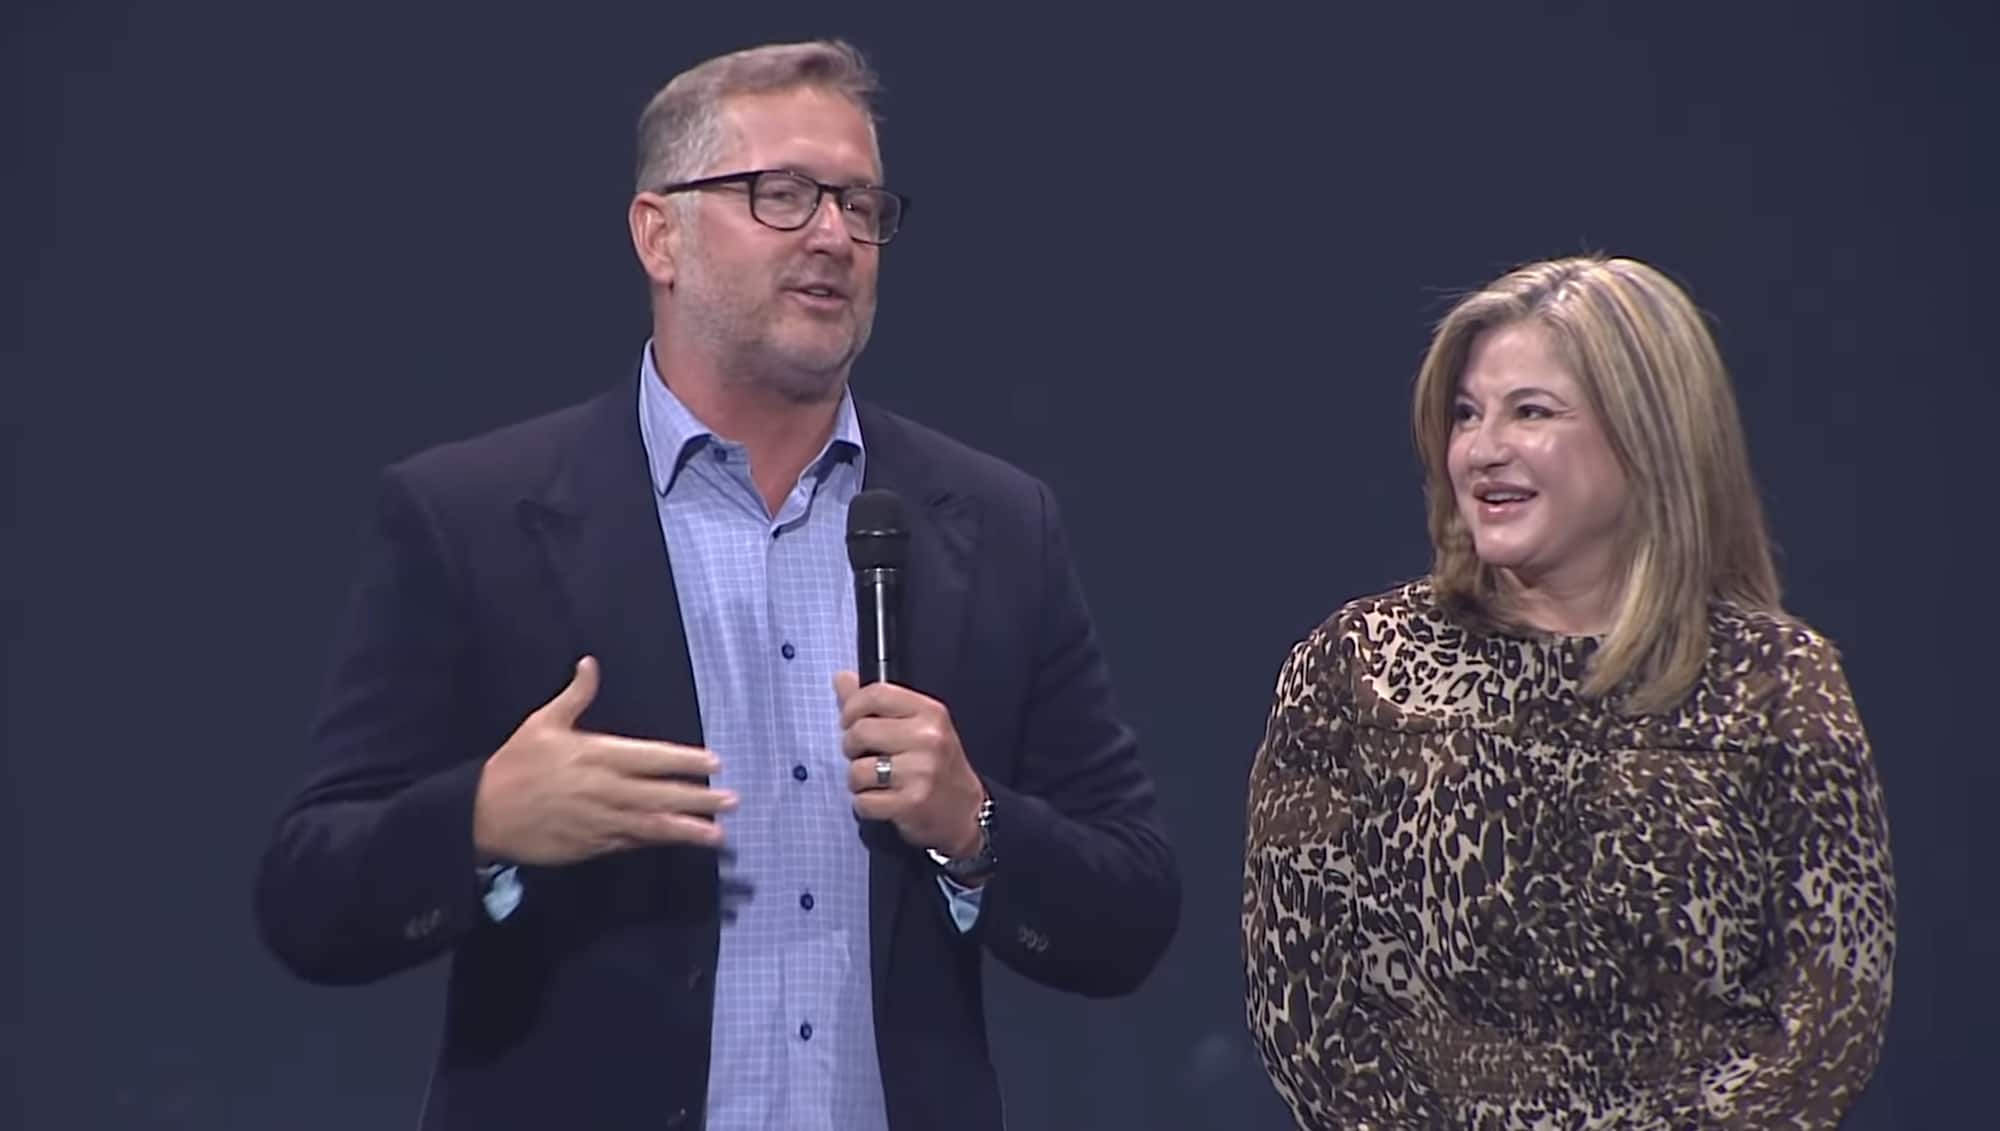 Ousted FL Megachurch Pastor Sues ARC, Alleging Conspiracy and Deception